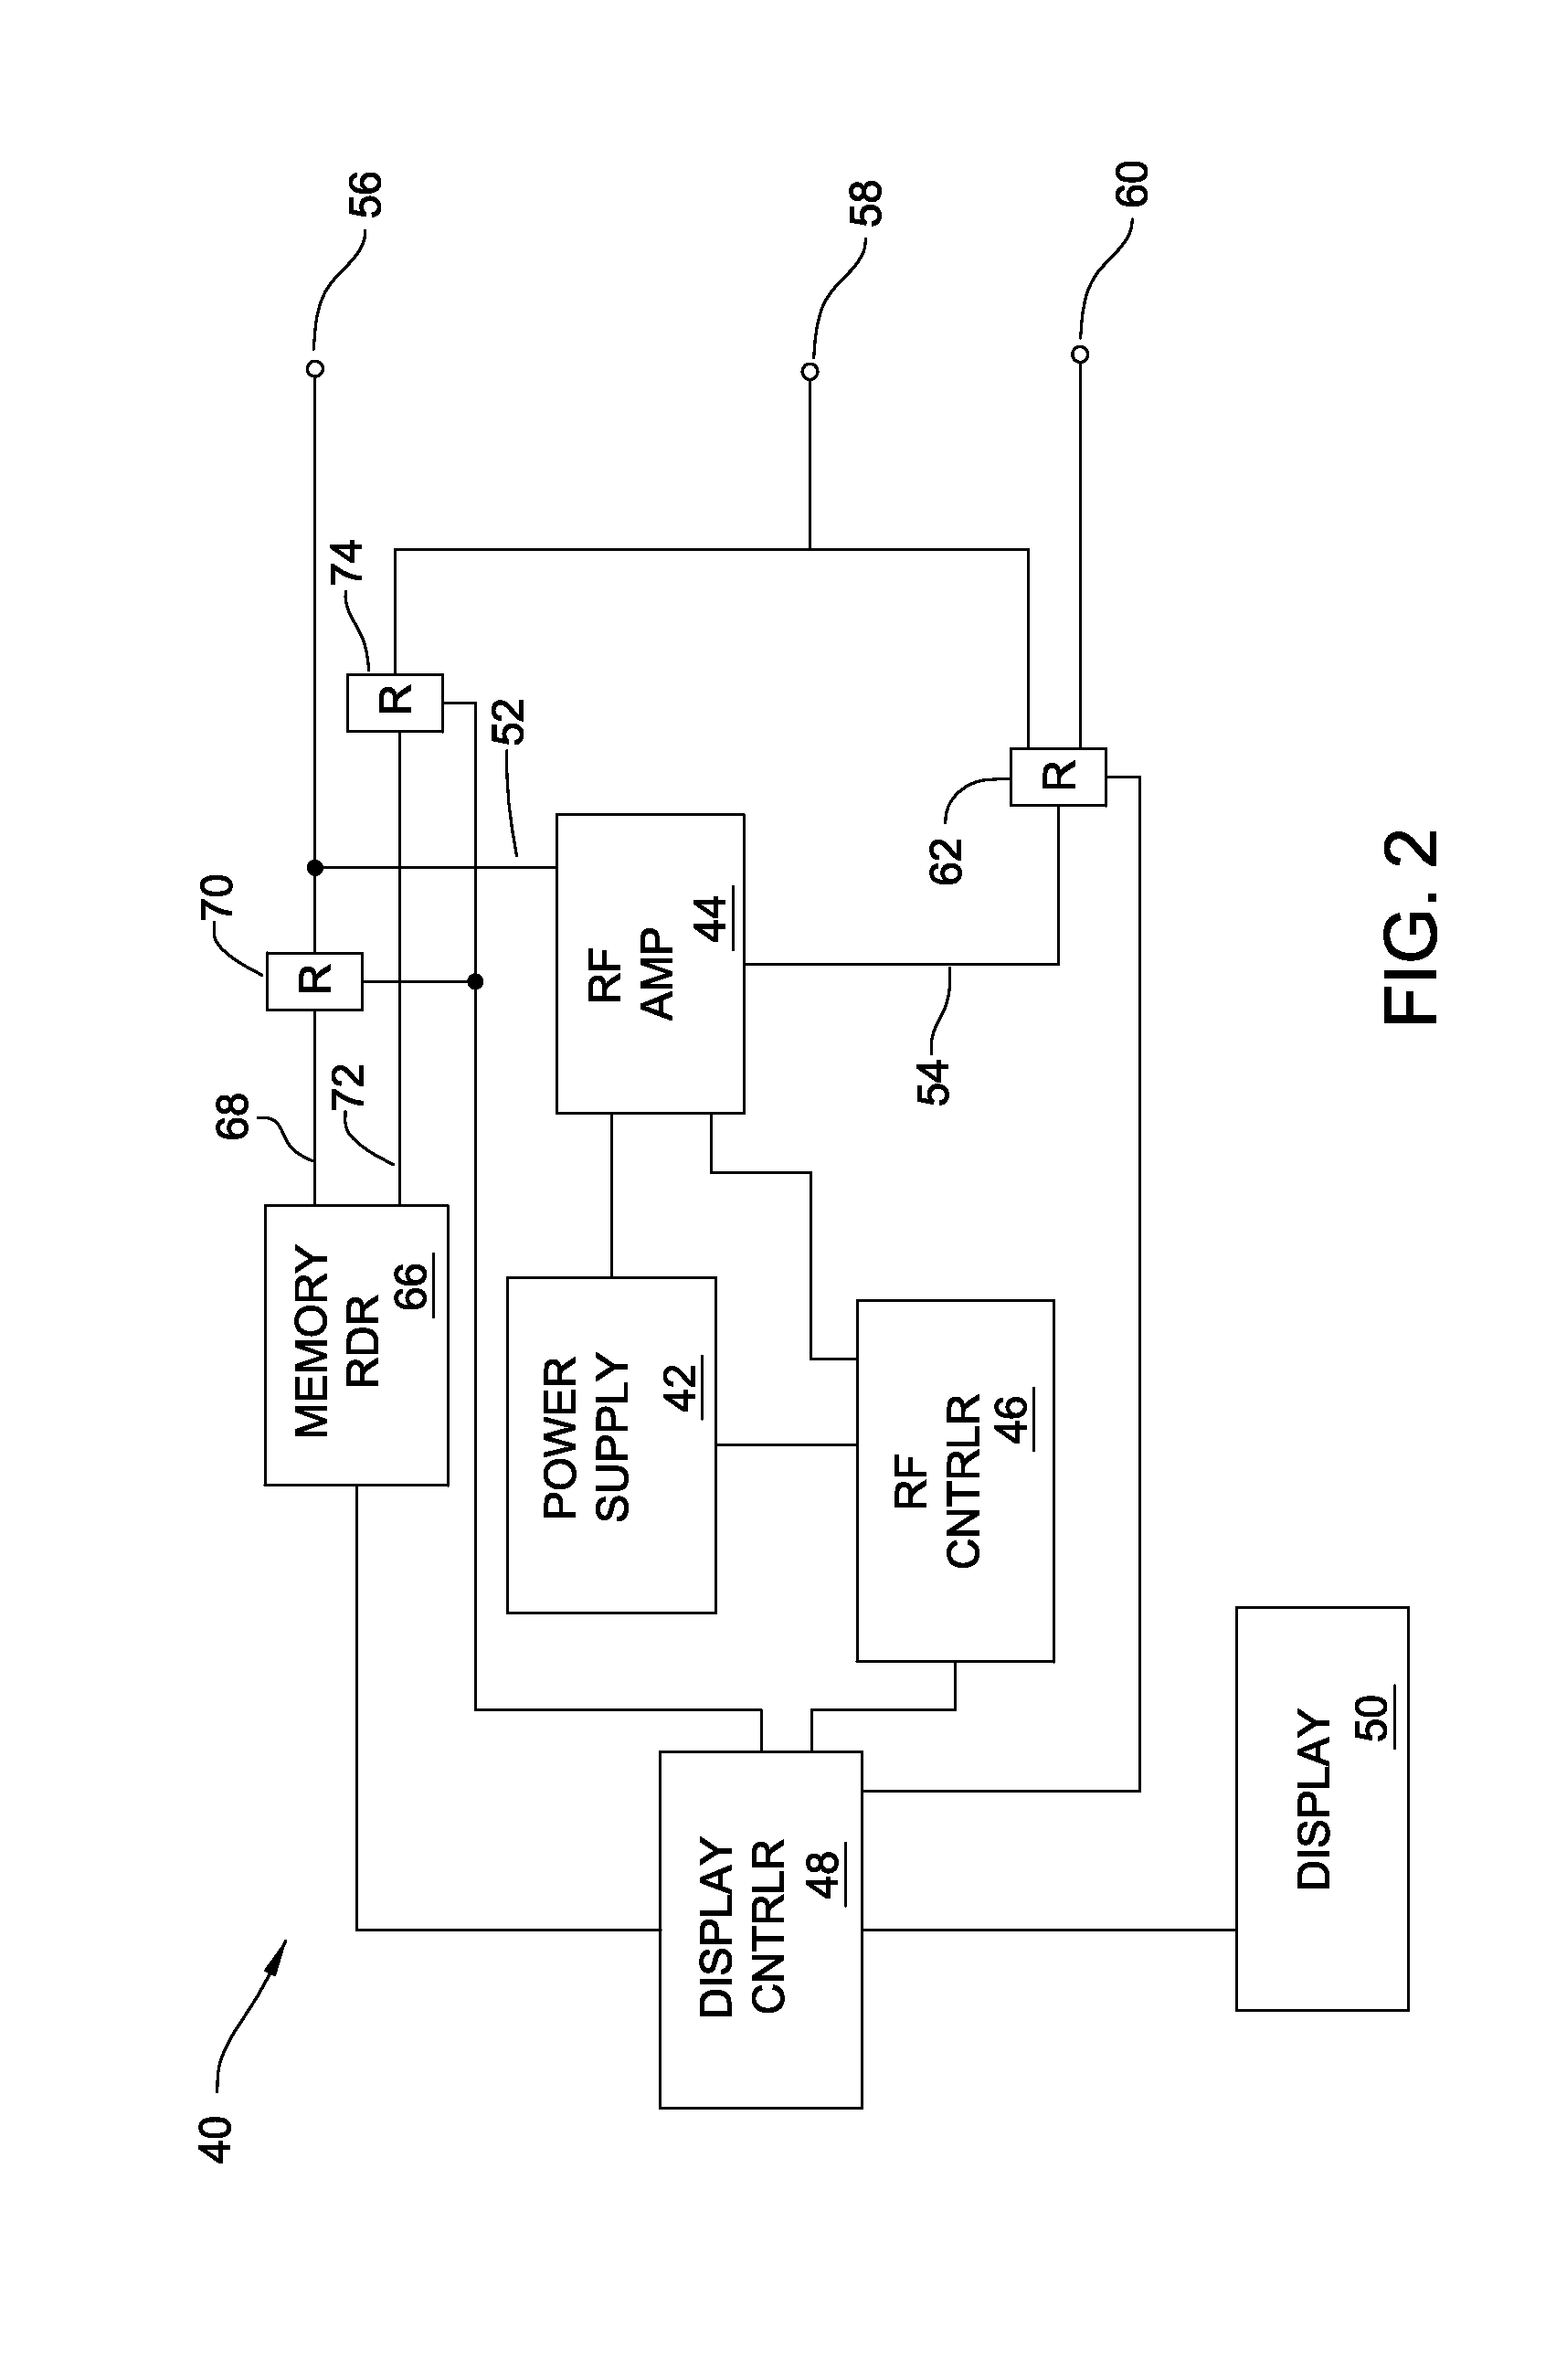 Powered surgical tool with an isolation circuit connected between the tool power terminals and the memory internal to the tool